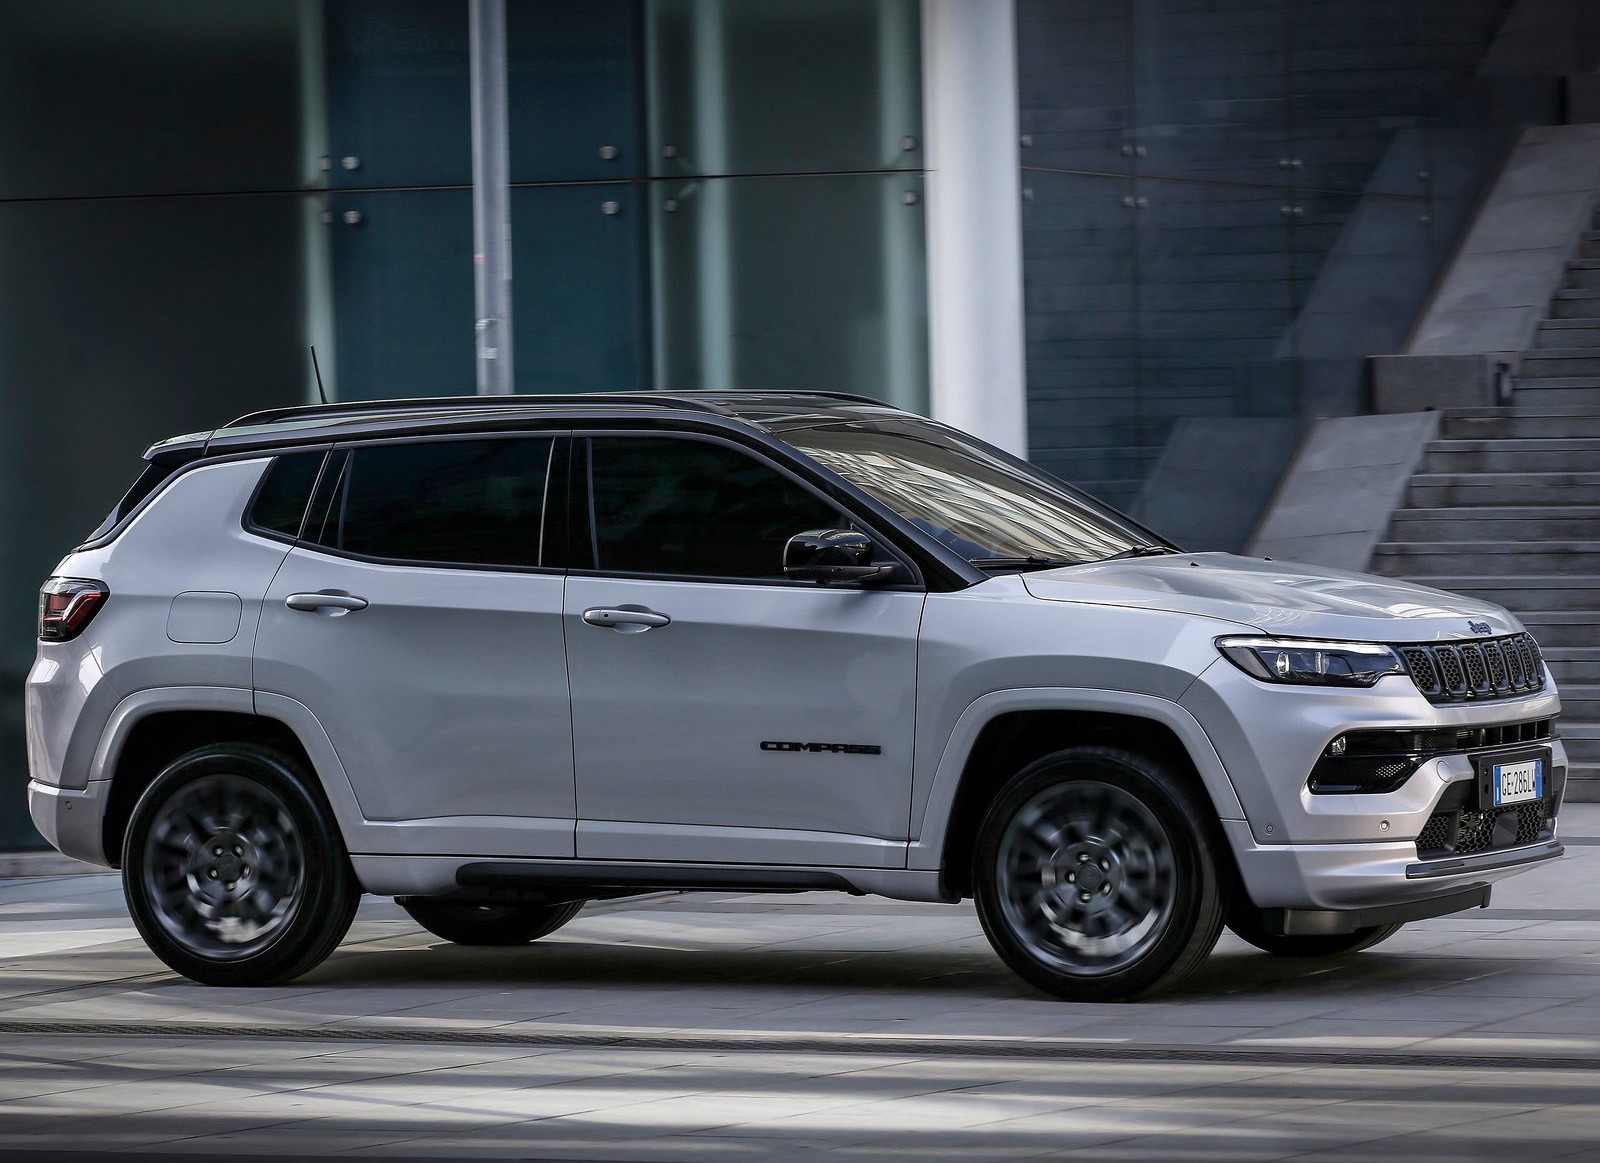 2022 Jeep Compass Is This the Coolest Shape of a GadgetEra Jeep So